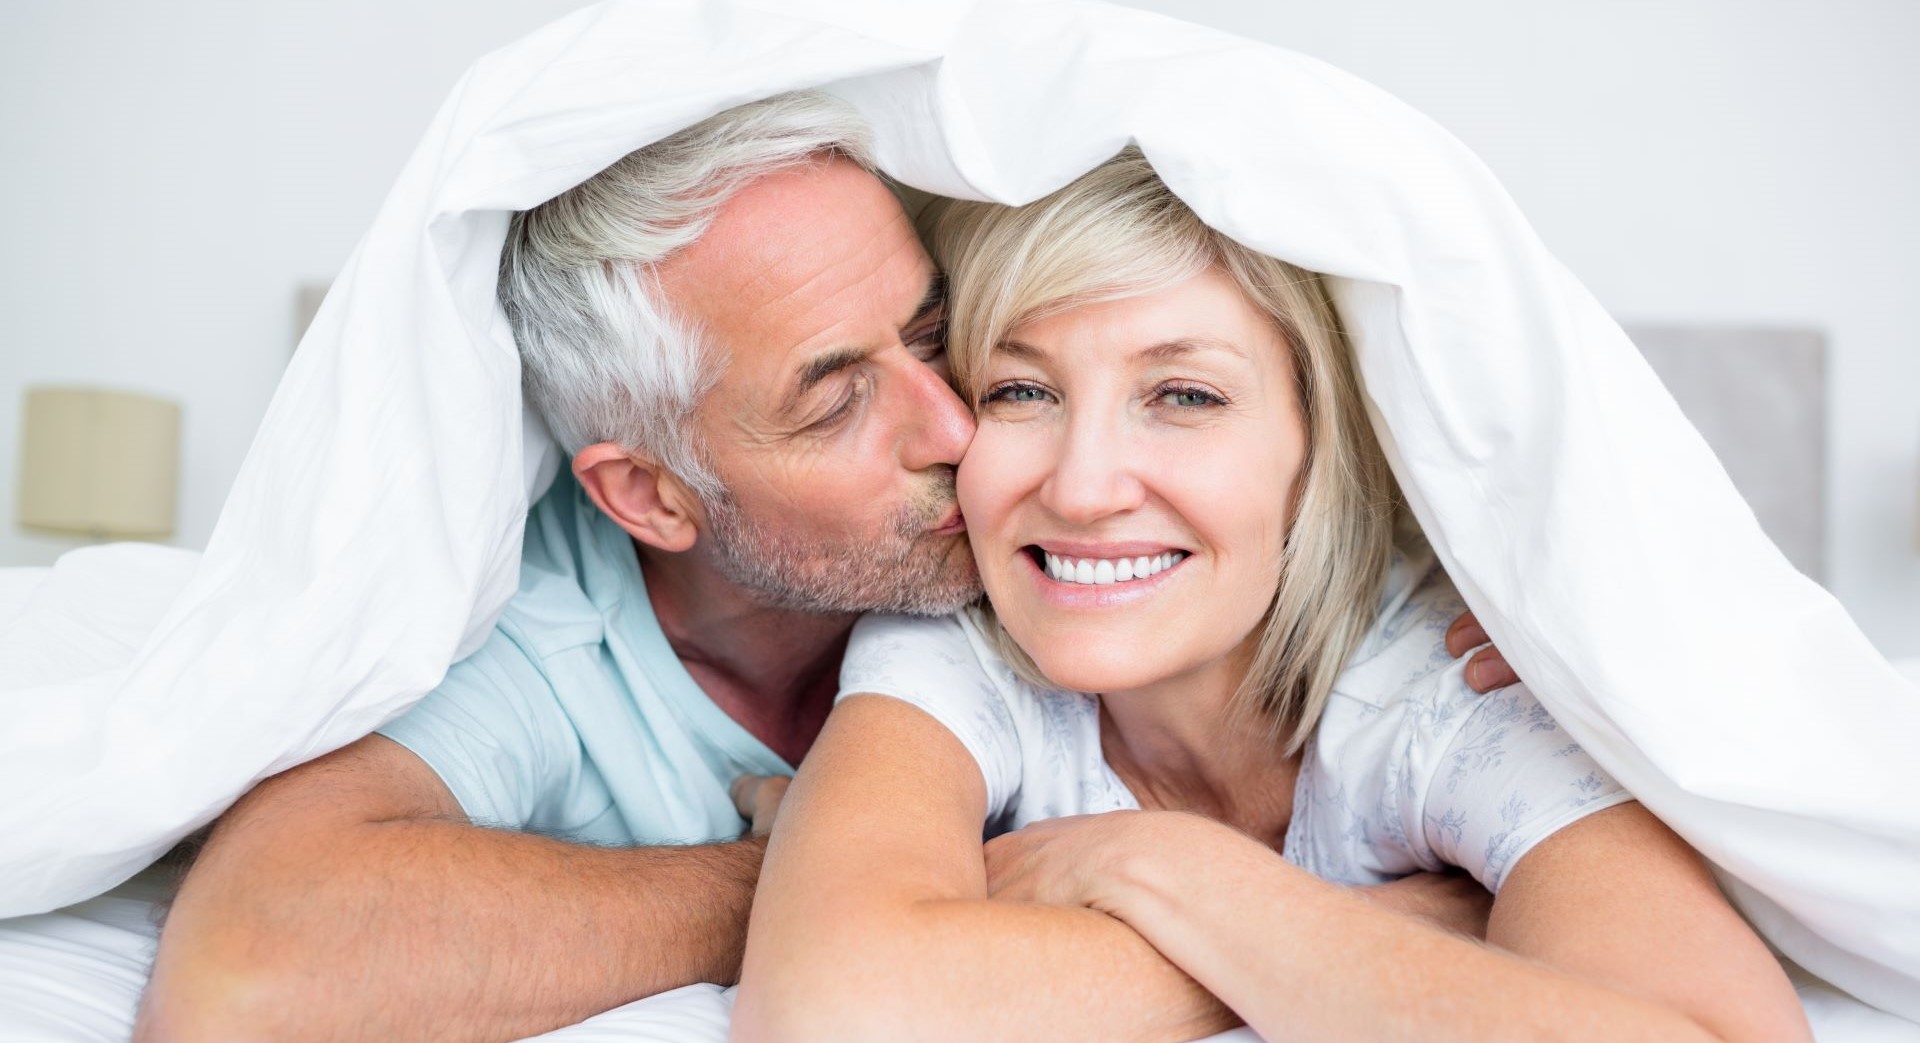 Man laying in bed and kissing smiling woman next to him on the cheek